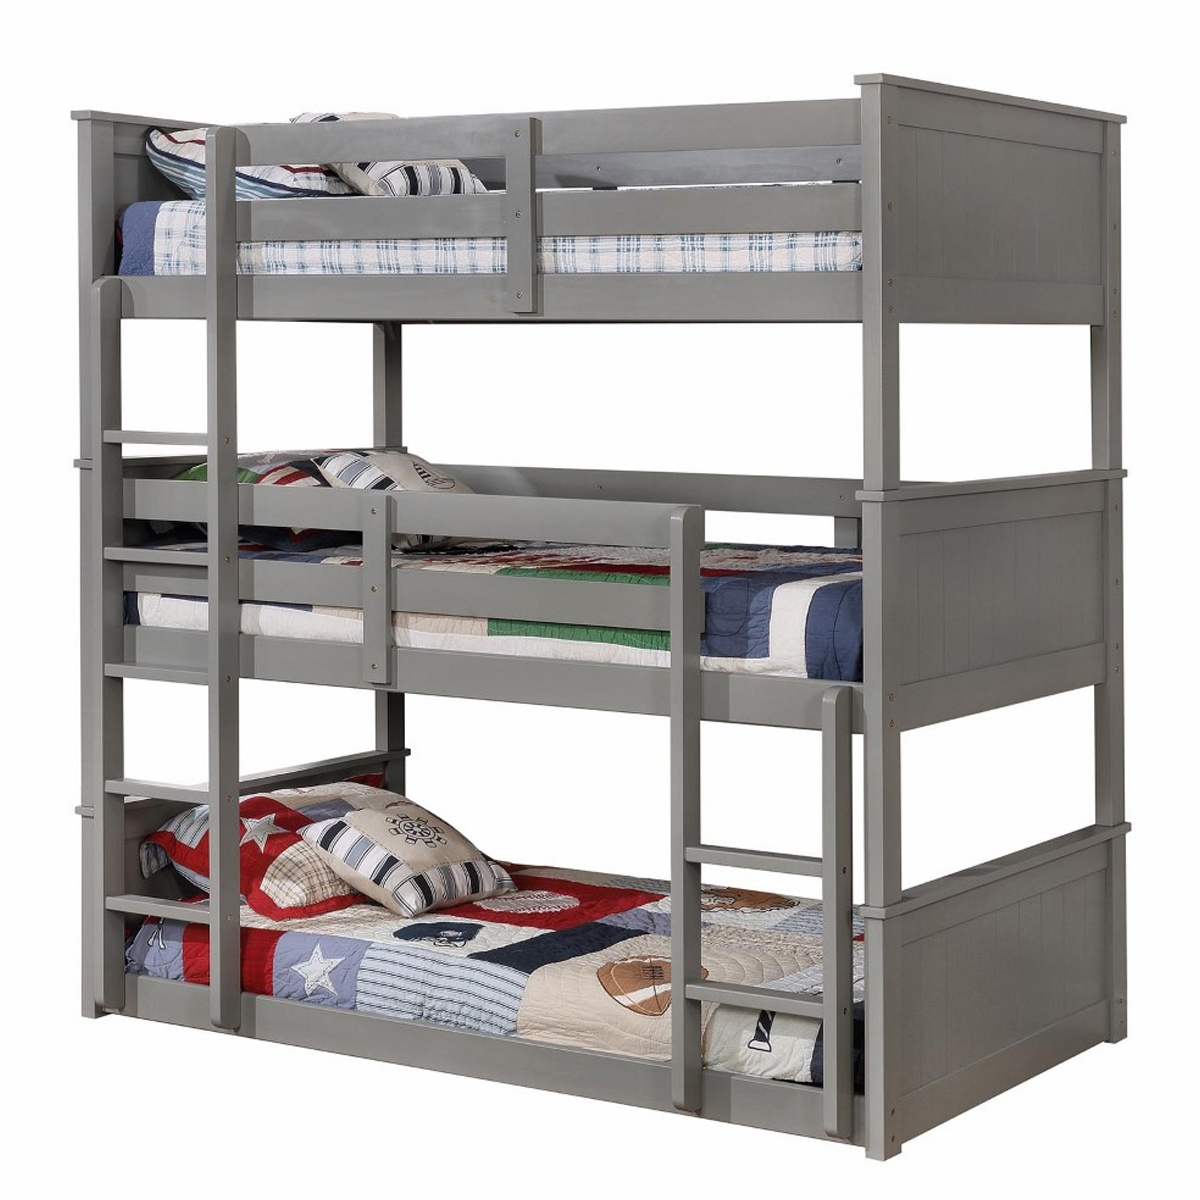 3 Tier Wooden Bunk Bed With Attached Ladders And Slat Base, Gray- Saltoro Sherpi